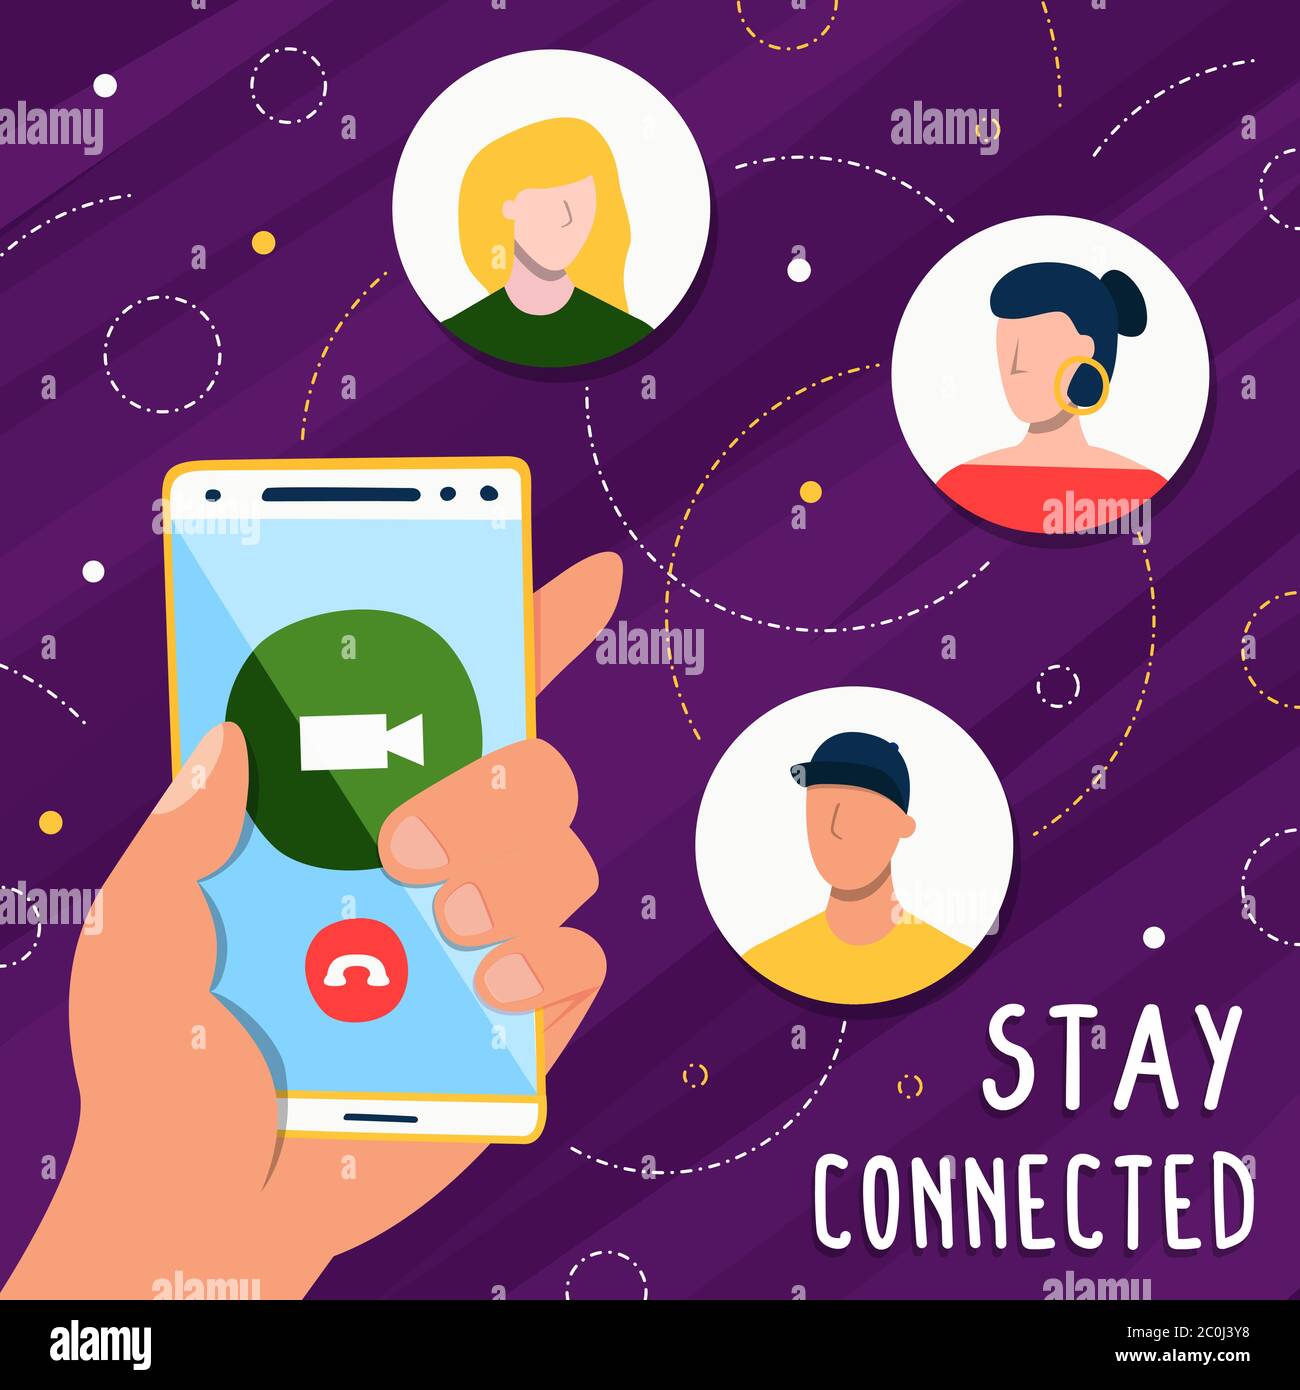 Stay connected illustration of people hand holding smart phone for social media connection or friend network communication. Stock Vector